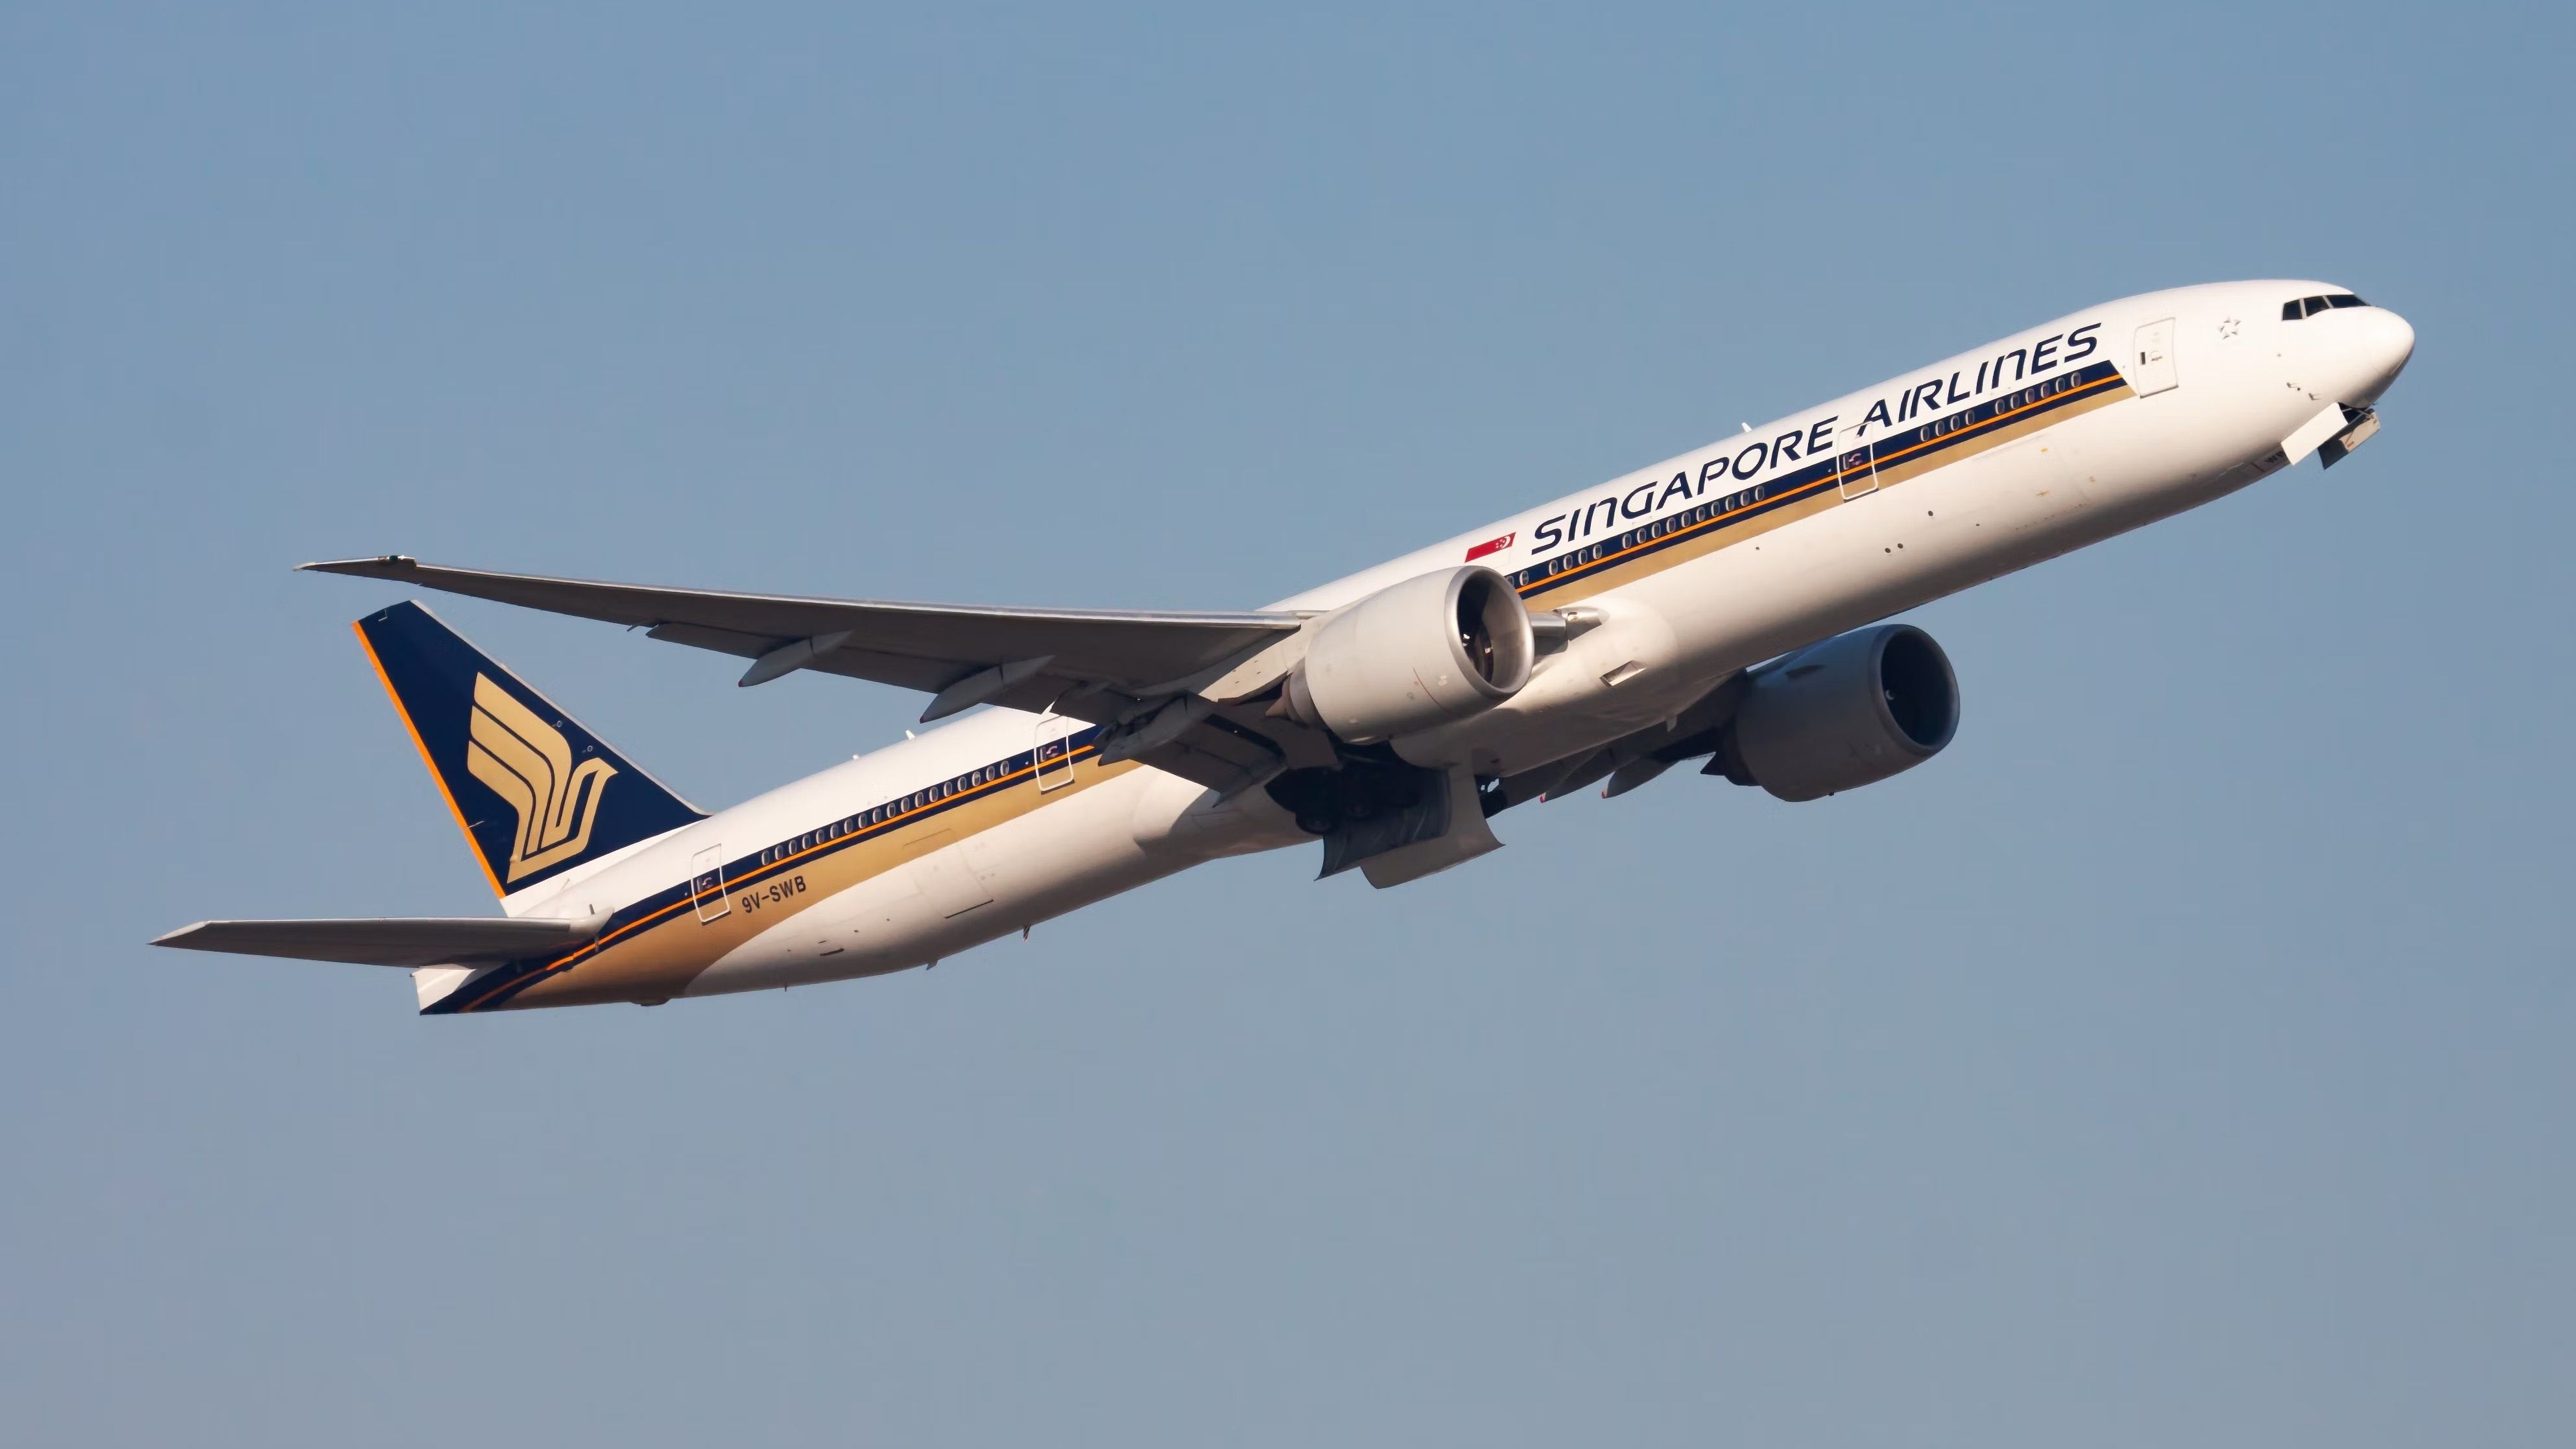 Singapore Airlines Boeing 777-300ER